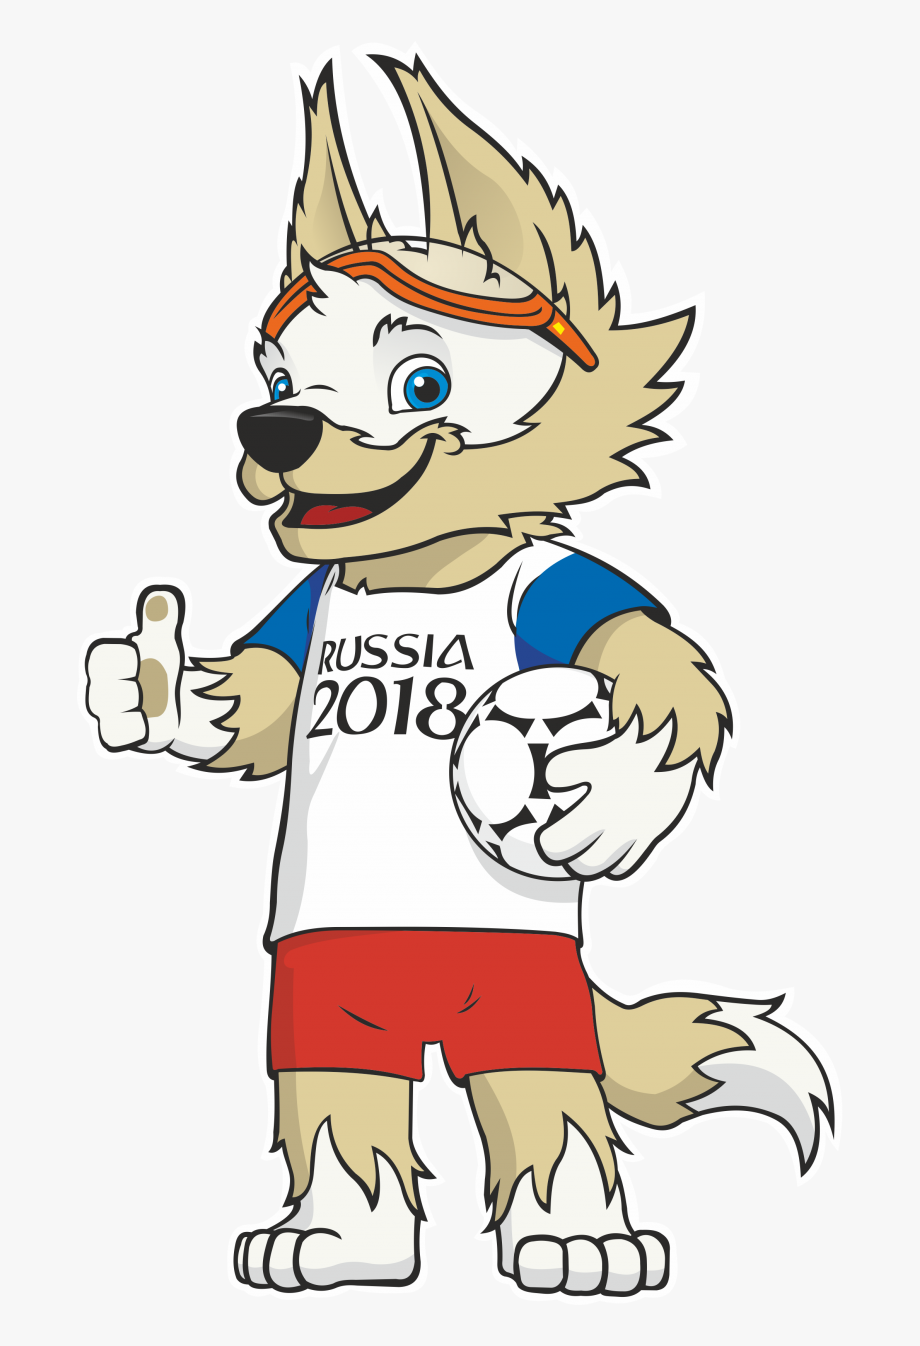 2018 Clipart World Cup.